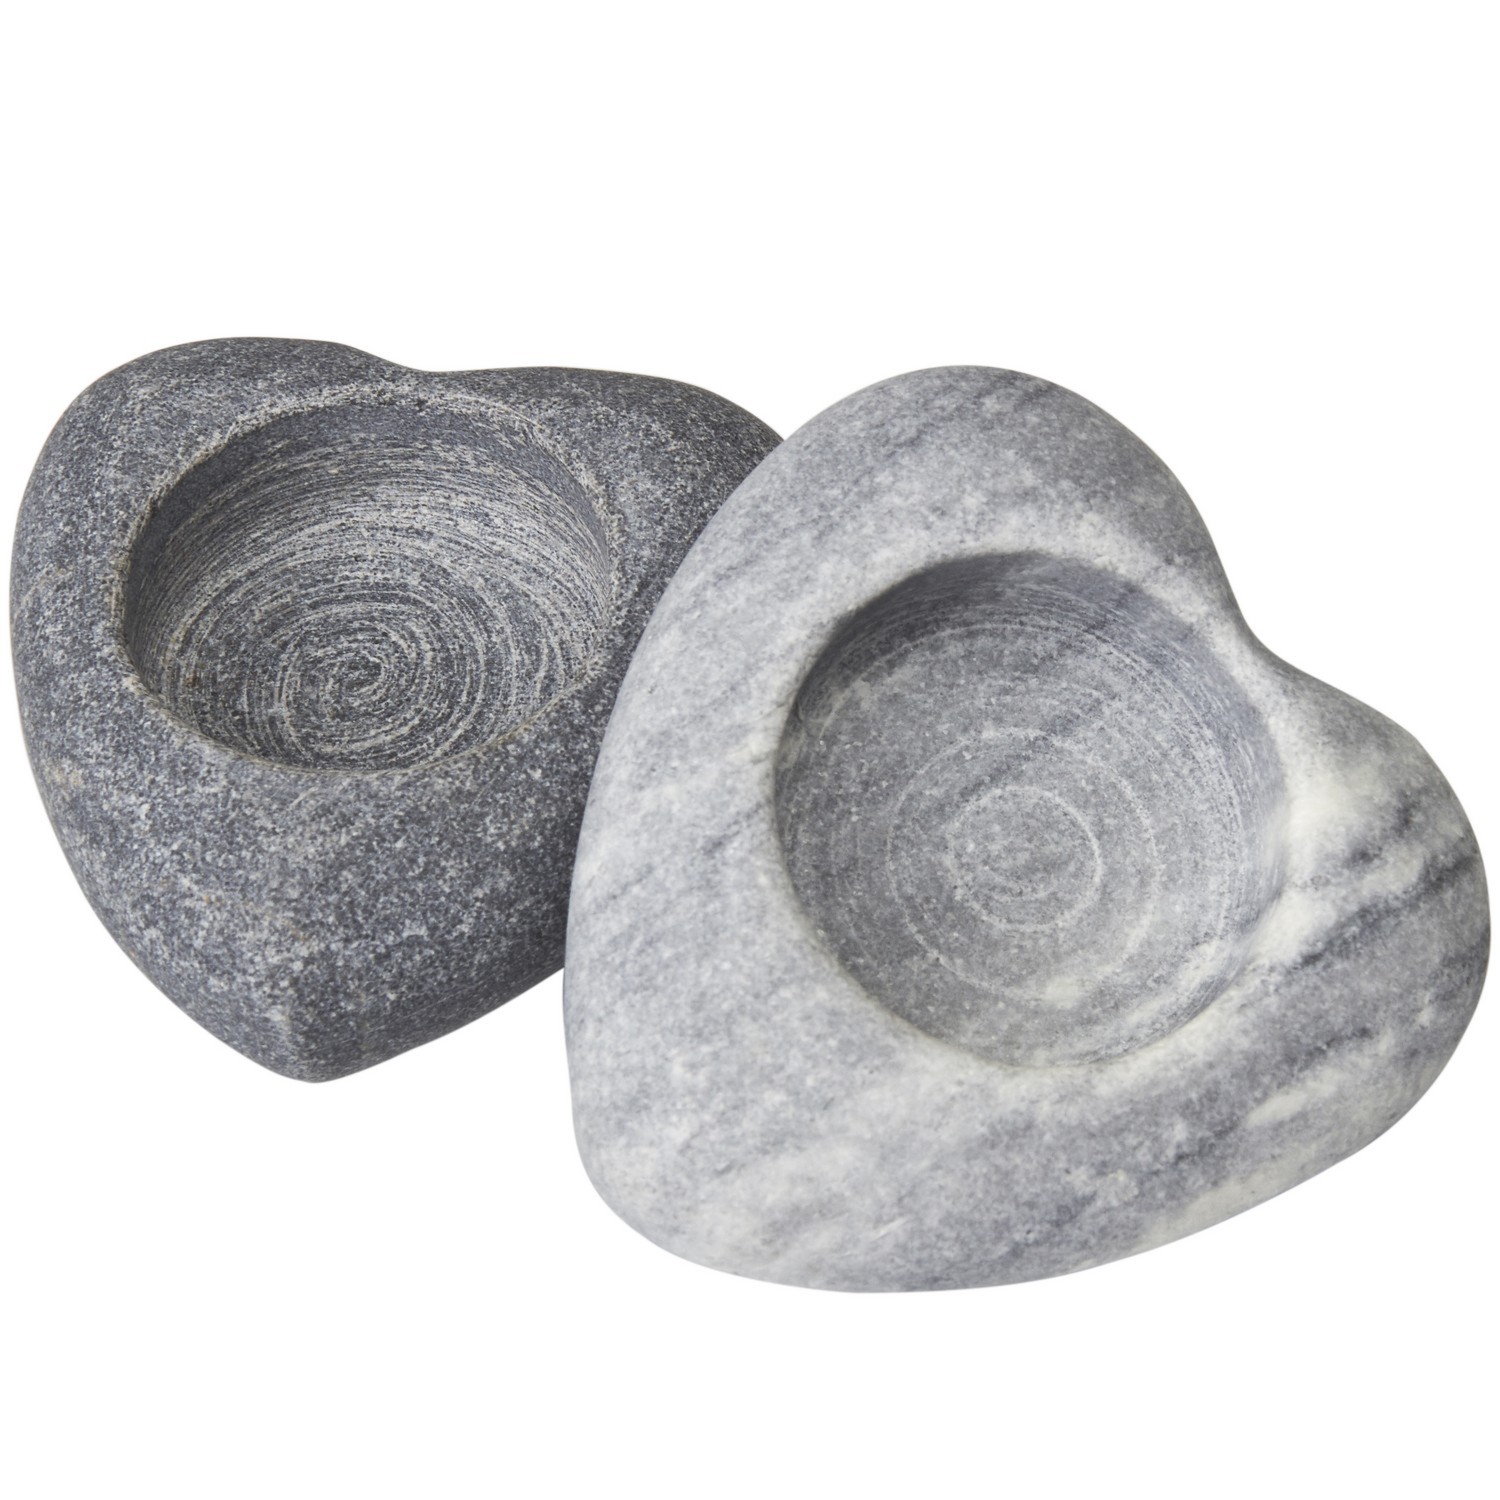 Single Grey Stone Heart Tealight Candle Holder in Assorted styles Image 2